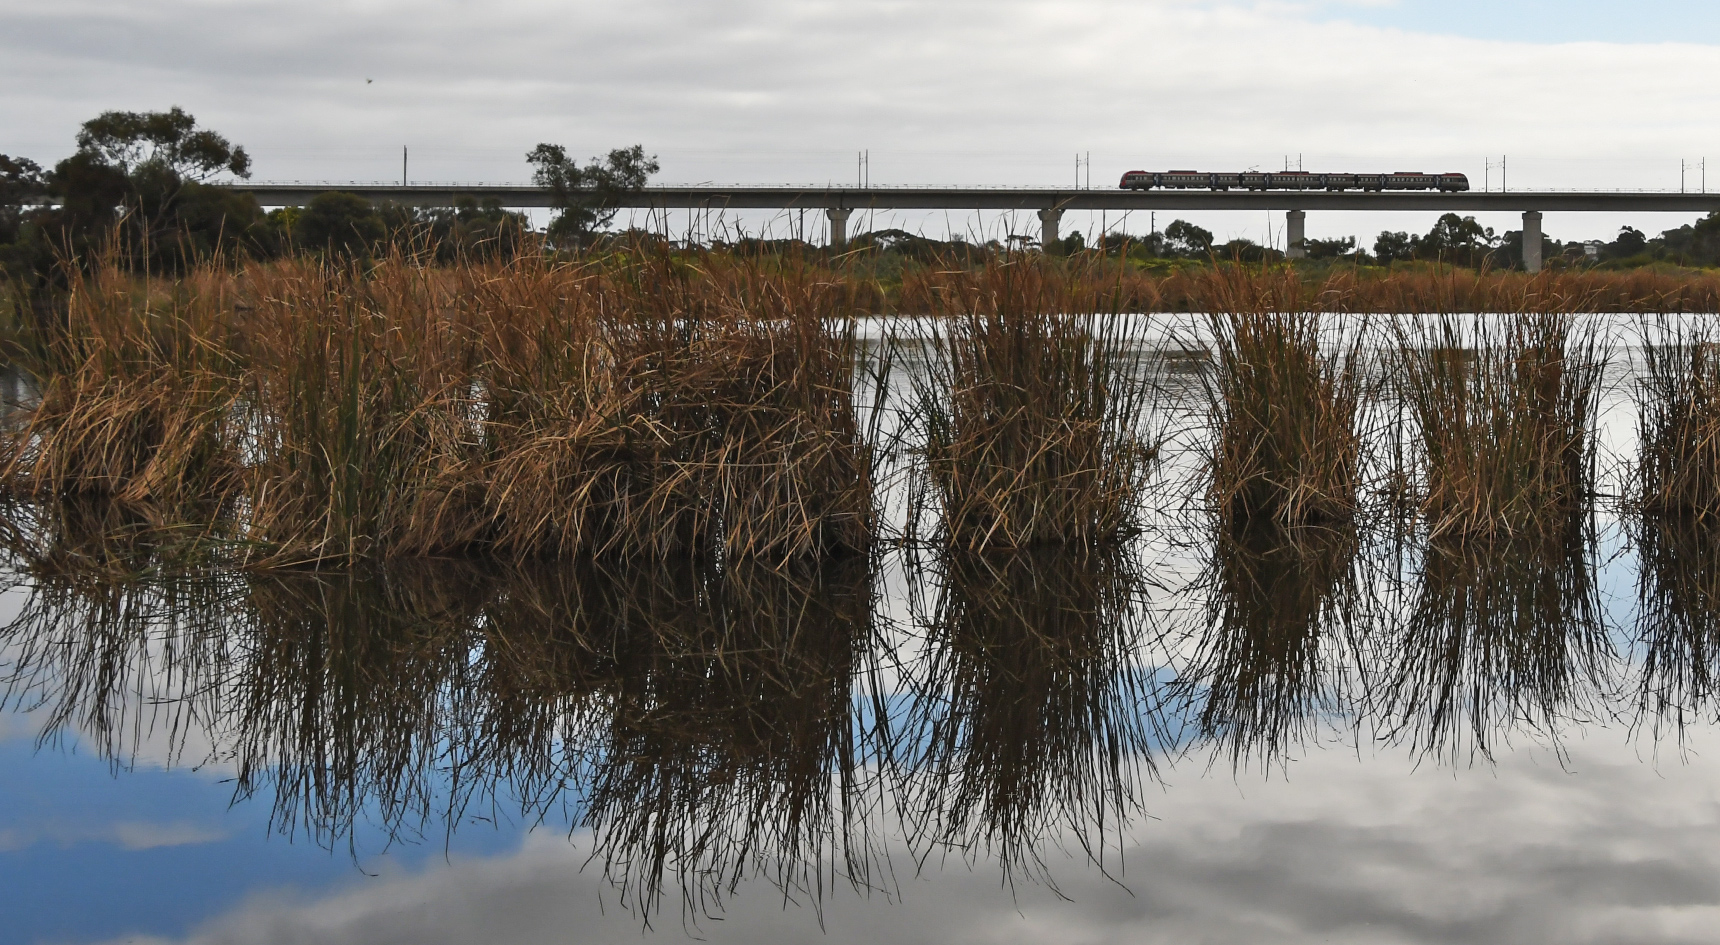 Train line at the back with the Onkaparinga River in the foreground